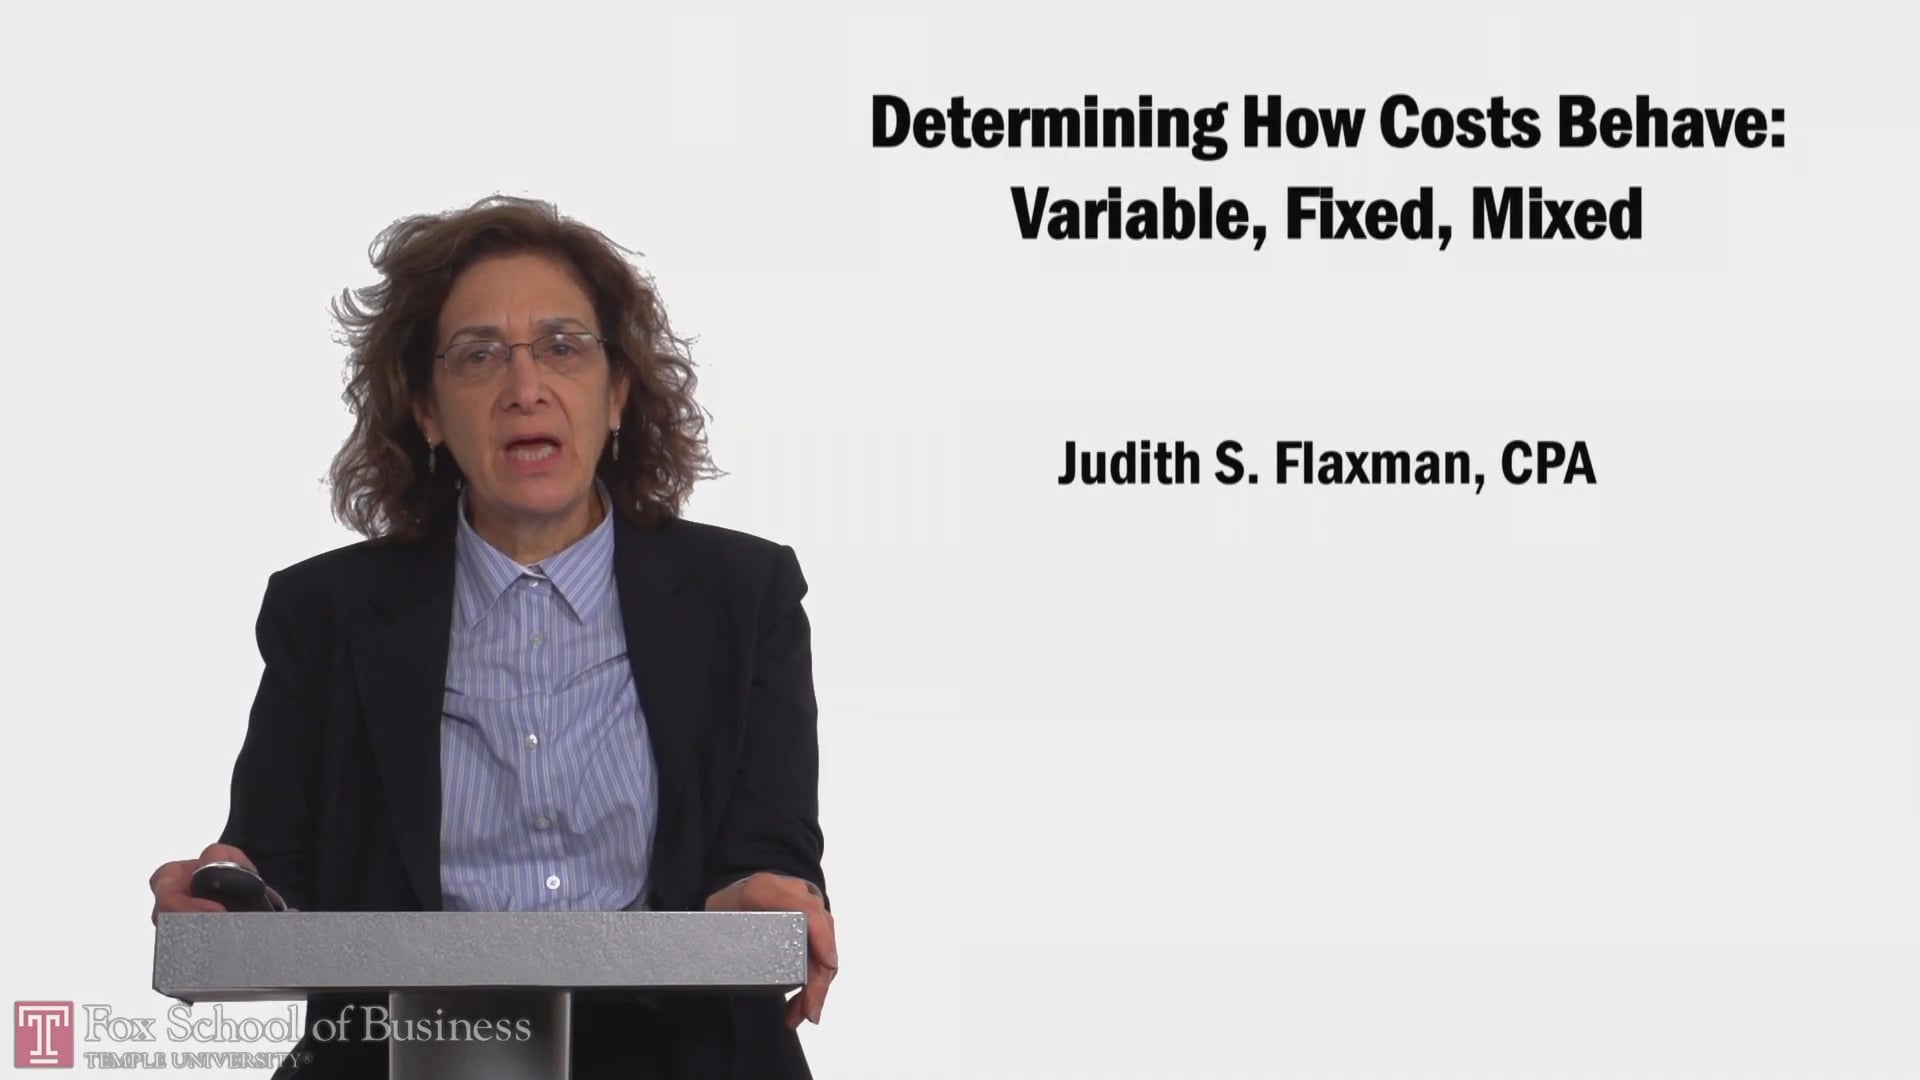 Determining How Costs Behave: Variable Fixed, Mixed